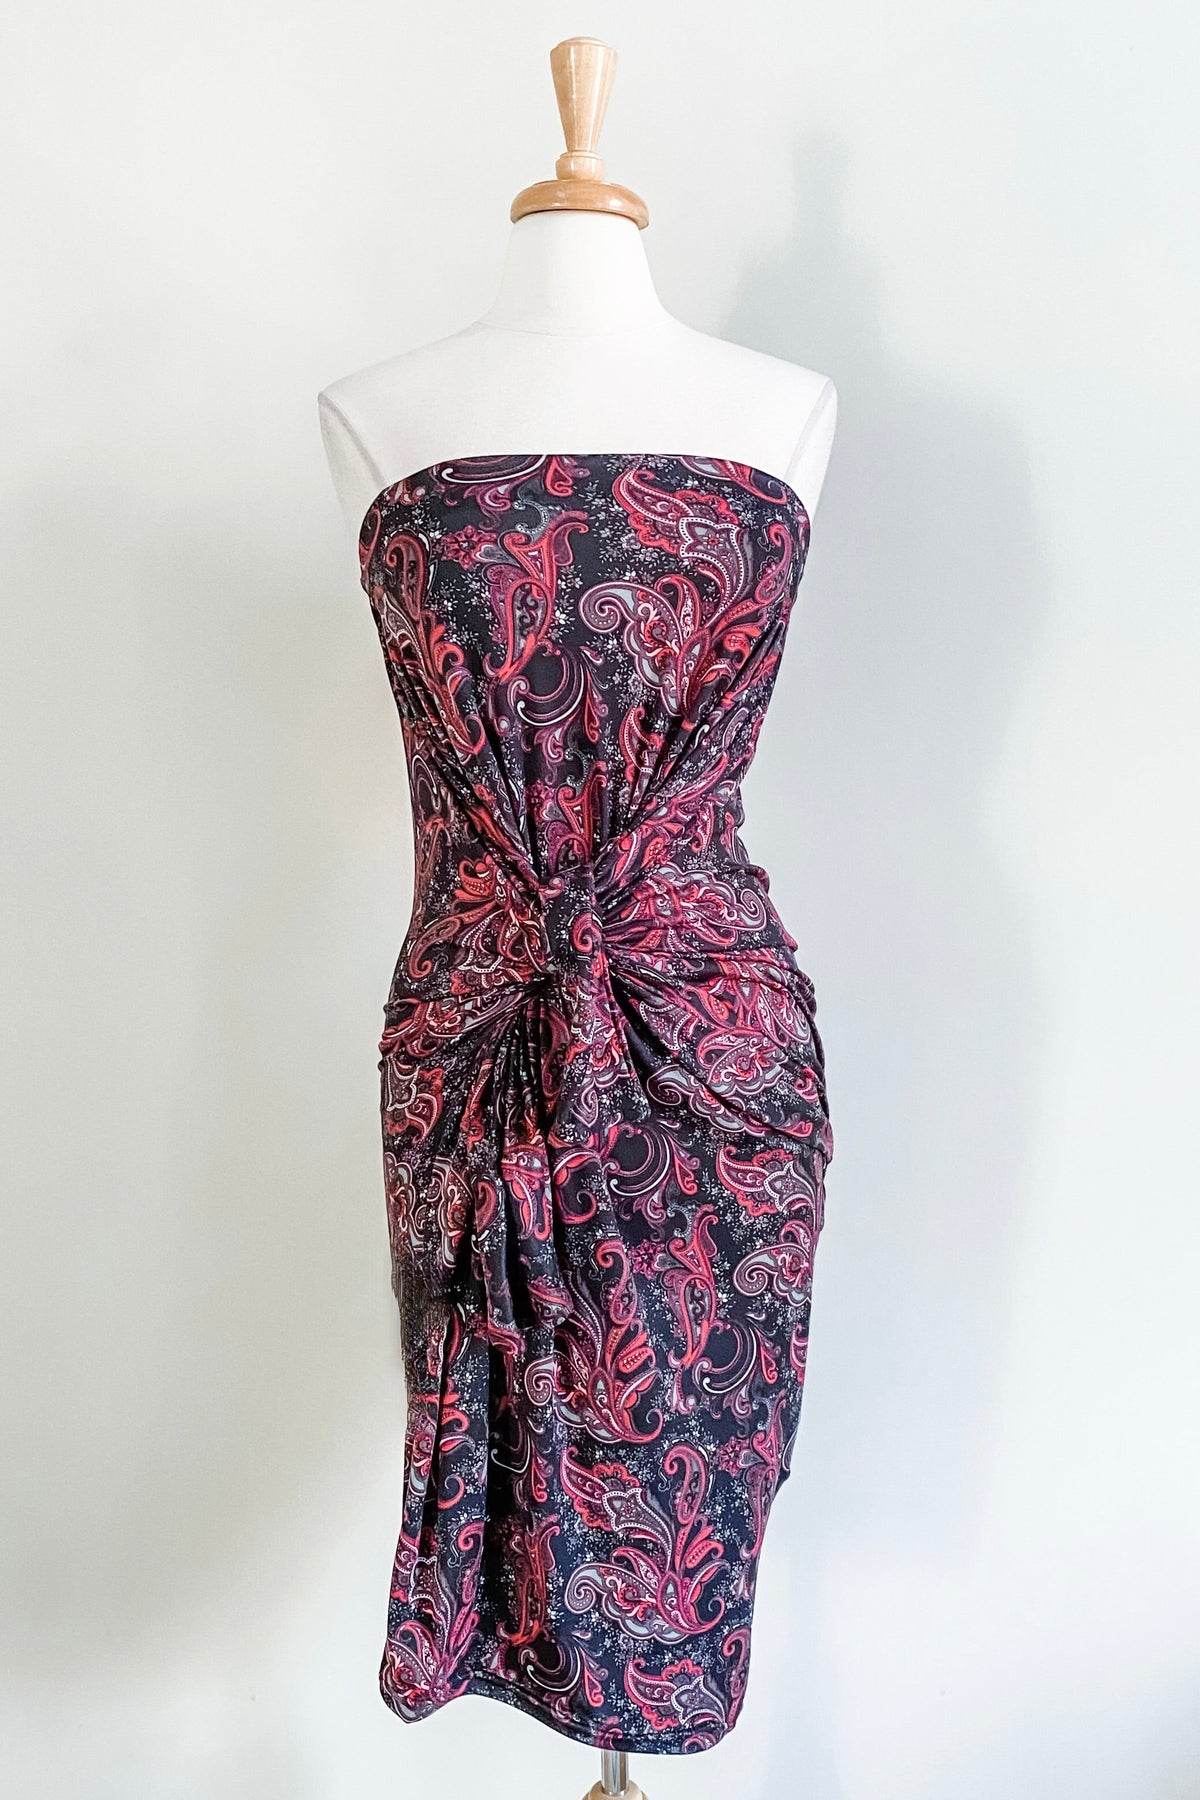 Diane Kroe Origami Dress (Wine Paisley) - The Classic Capsule Collection